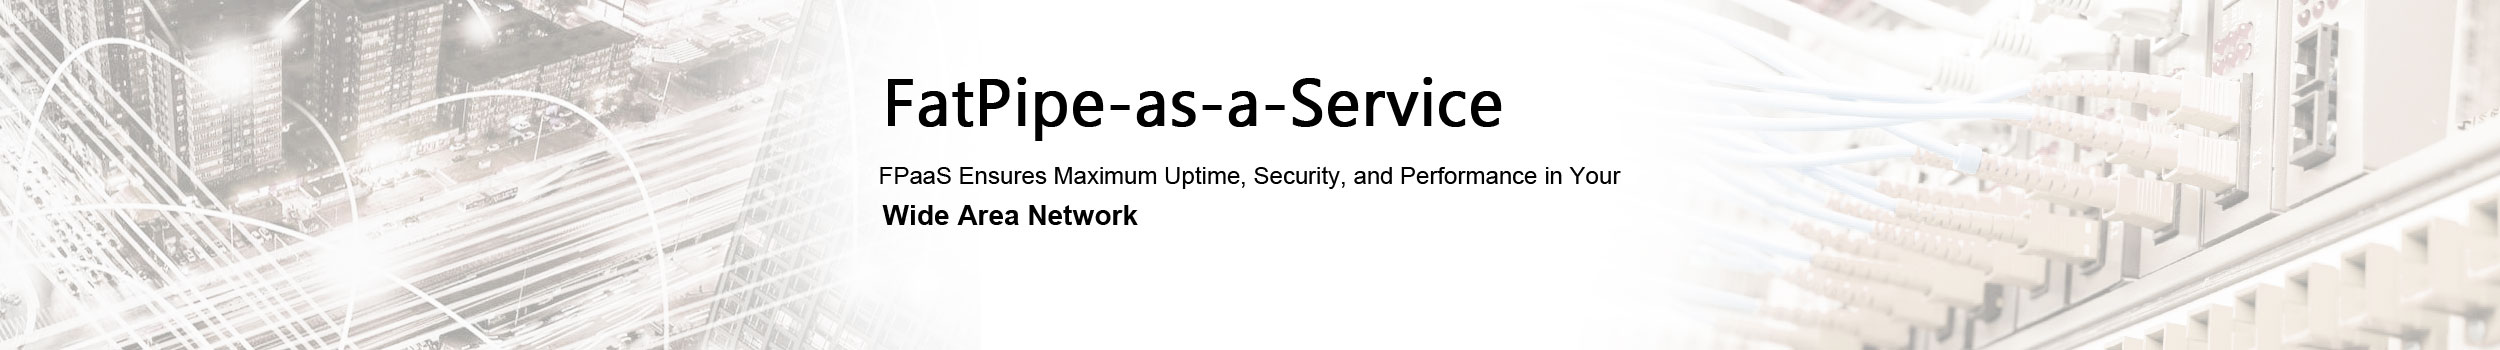 FatPipe-as-a-Service MSPs